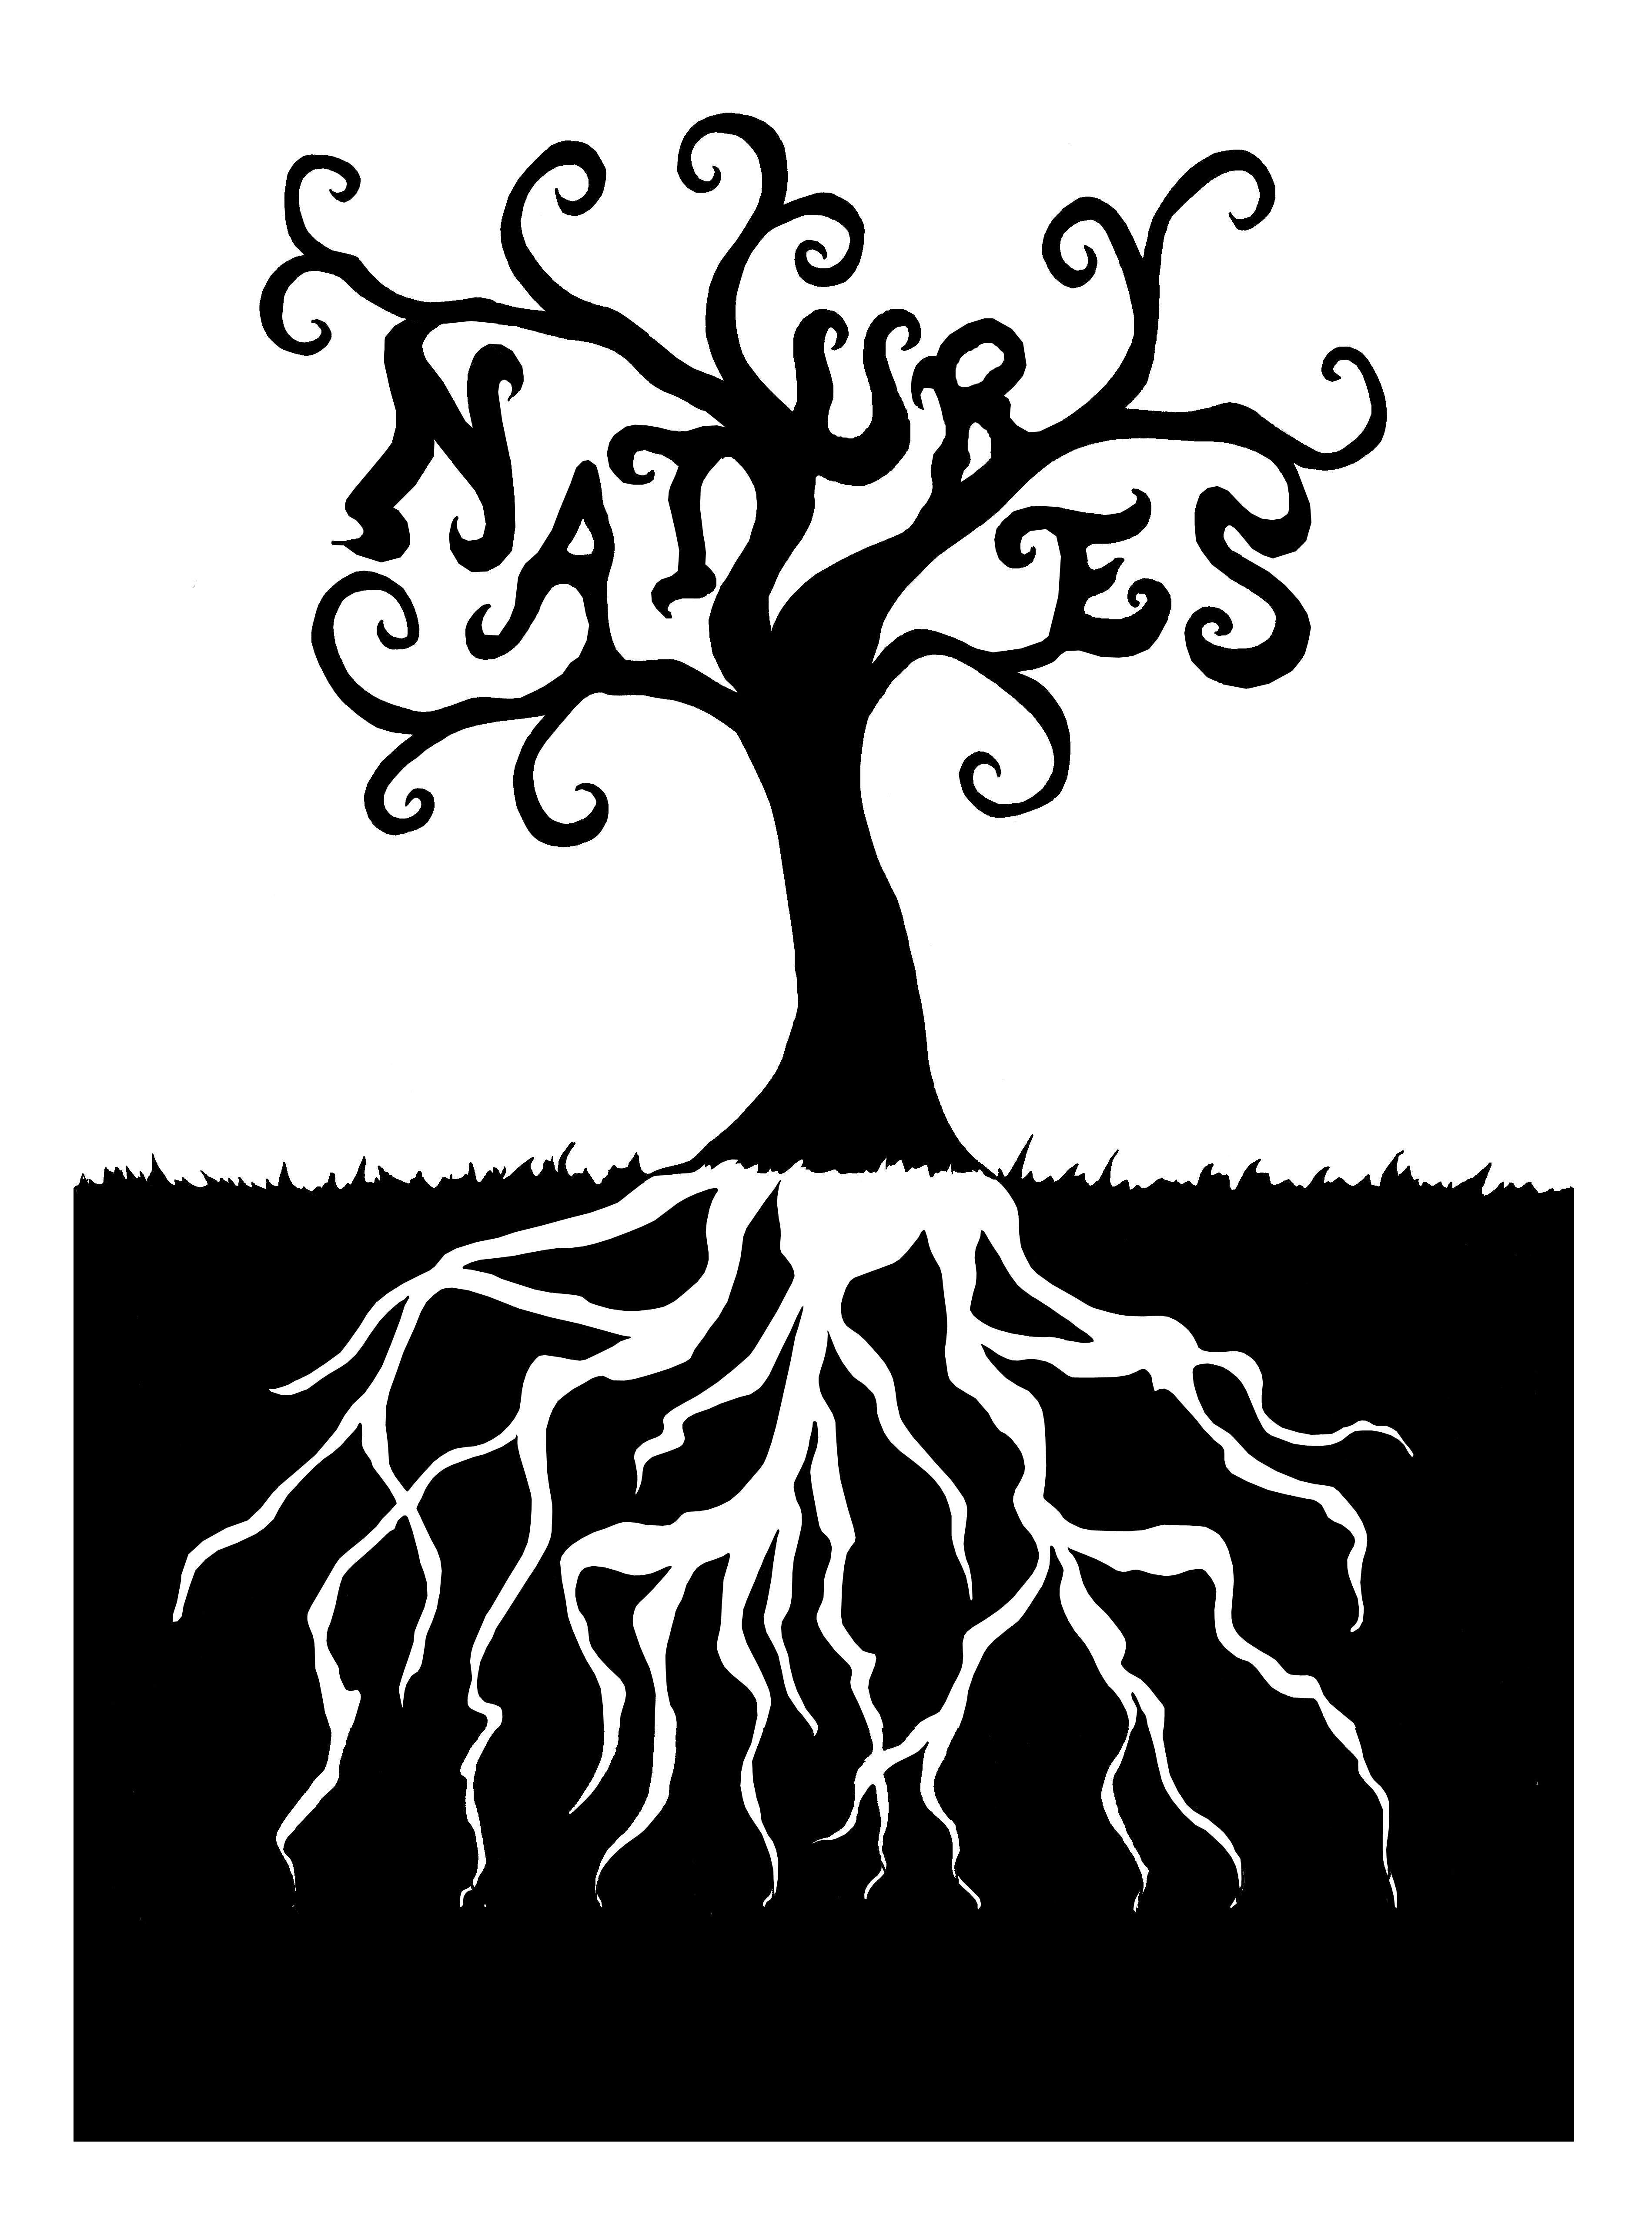 Drawings Of Trees With Roots - ClipArt Best